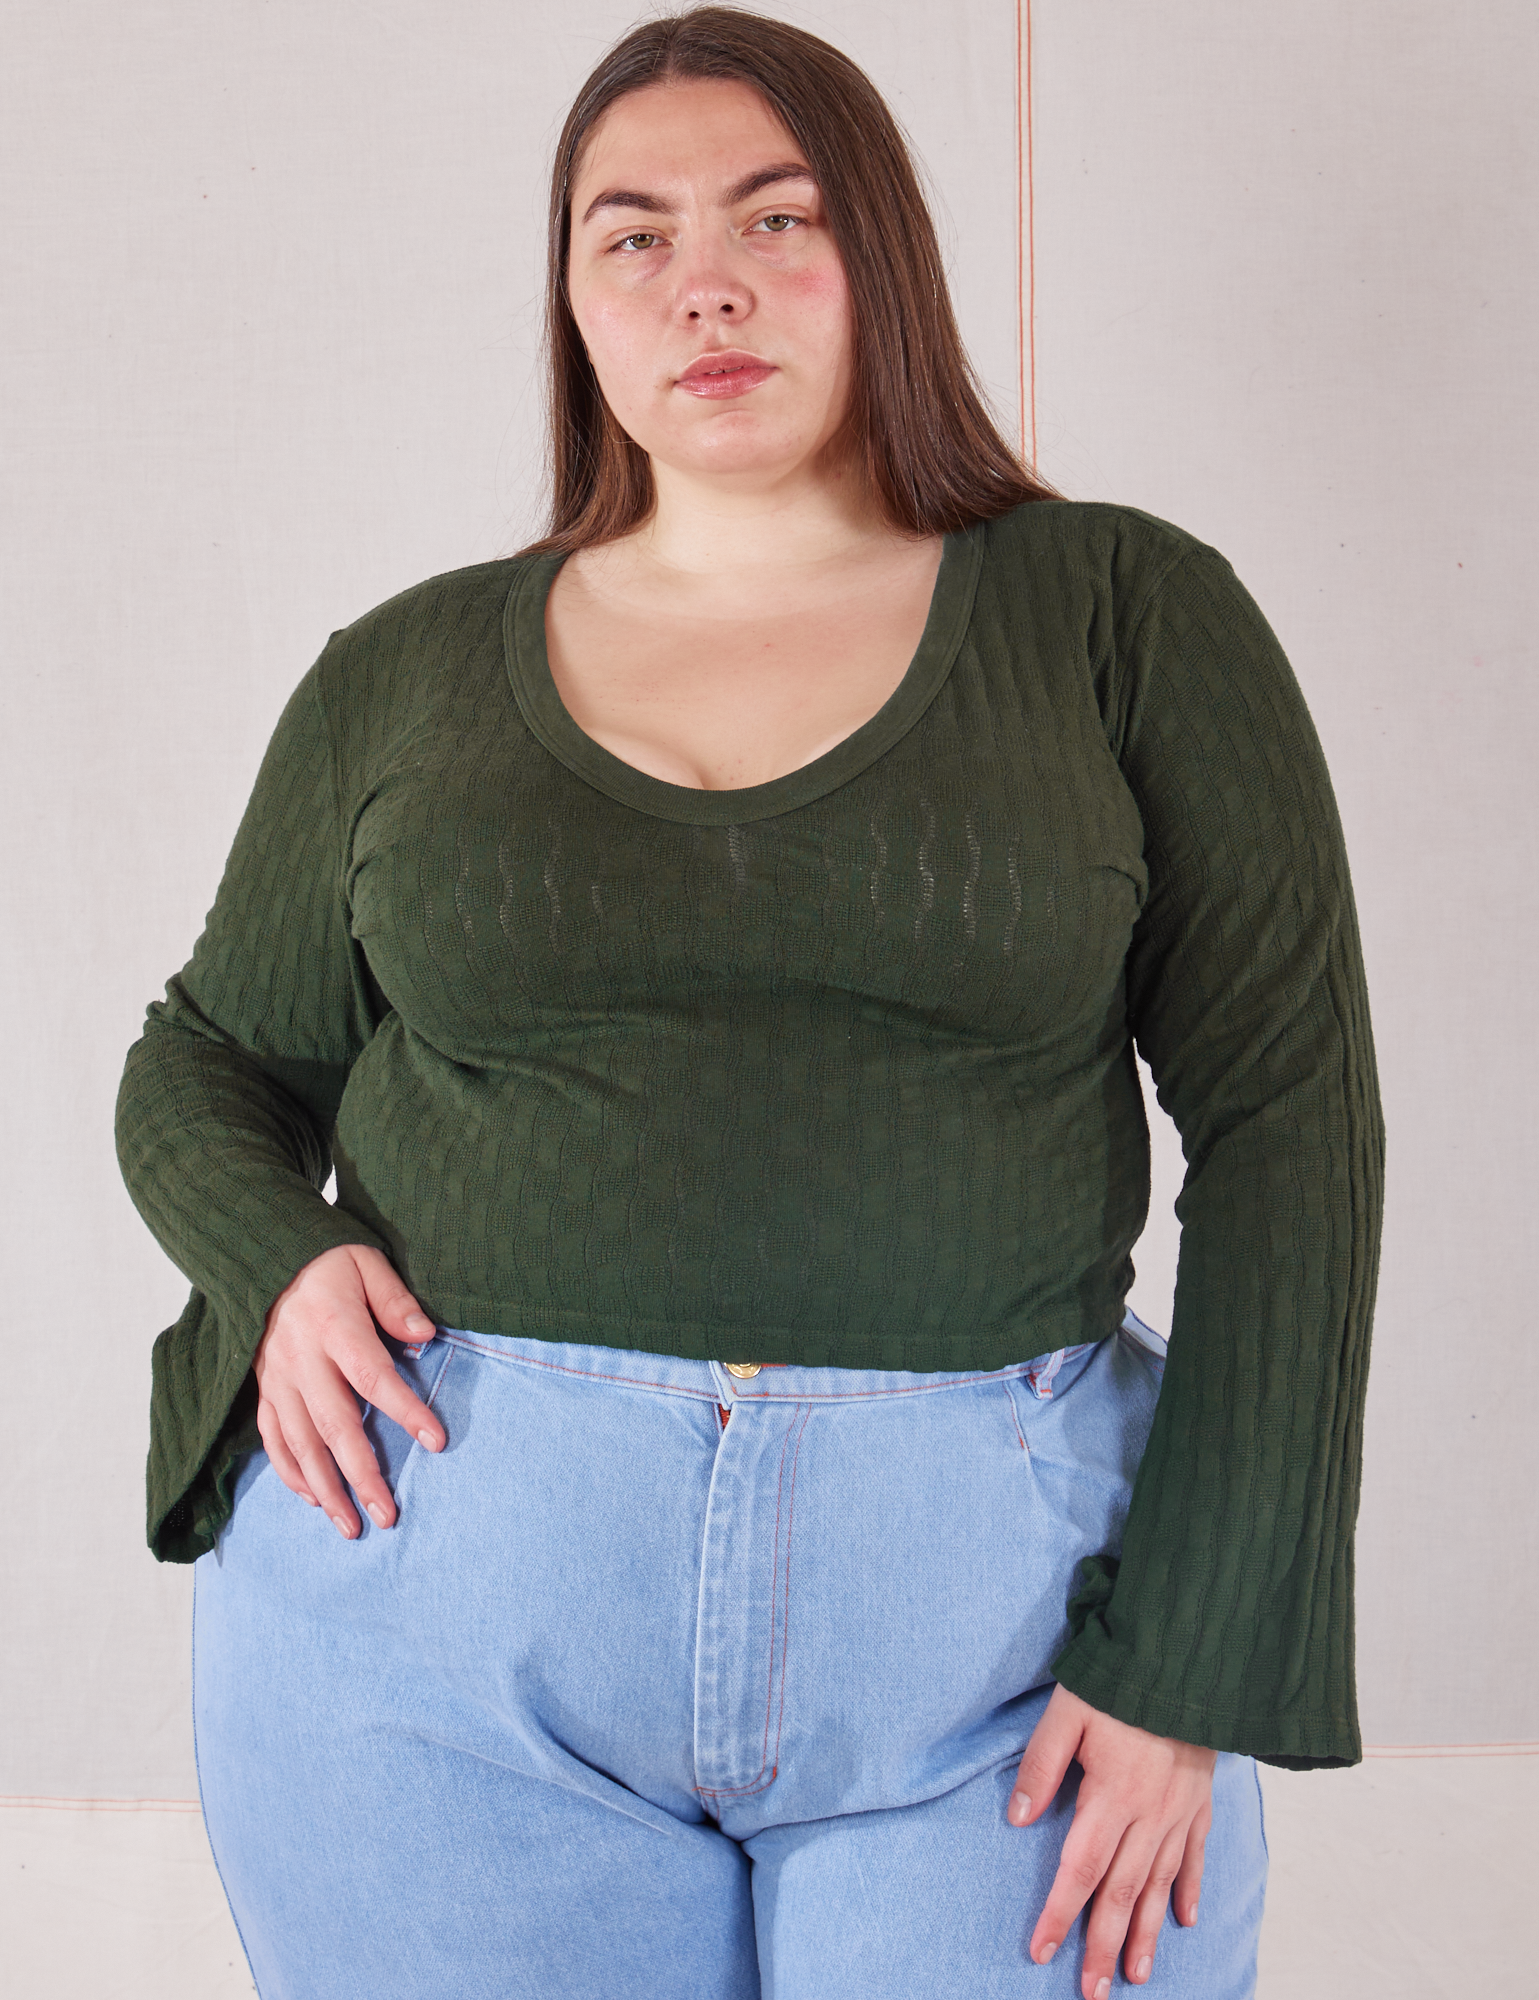 Marielena is 5'8" and wearing 1XL Bell Sleeve Top in Swamp Green